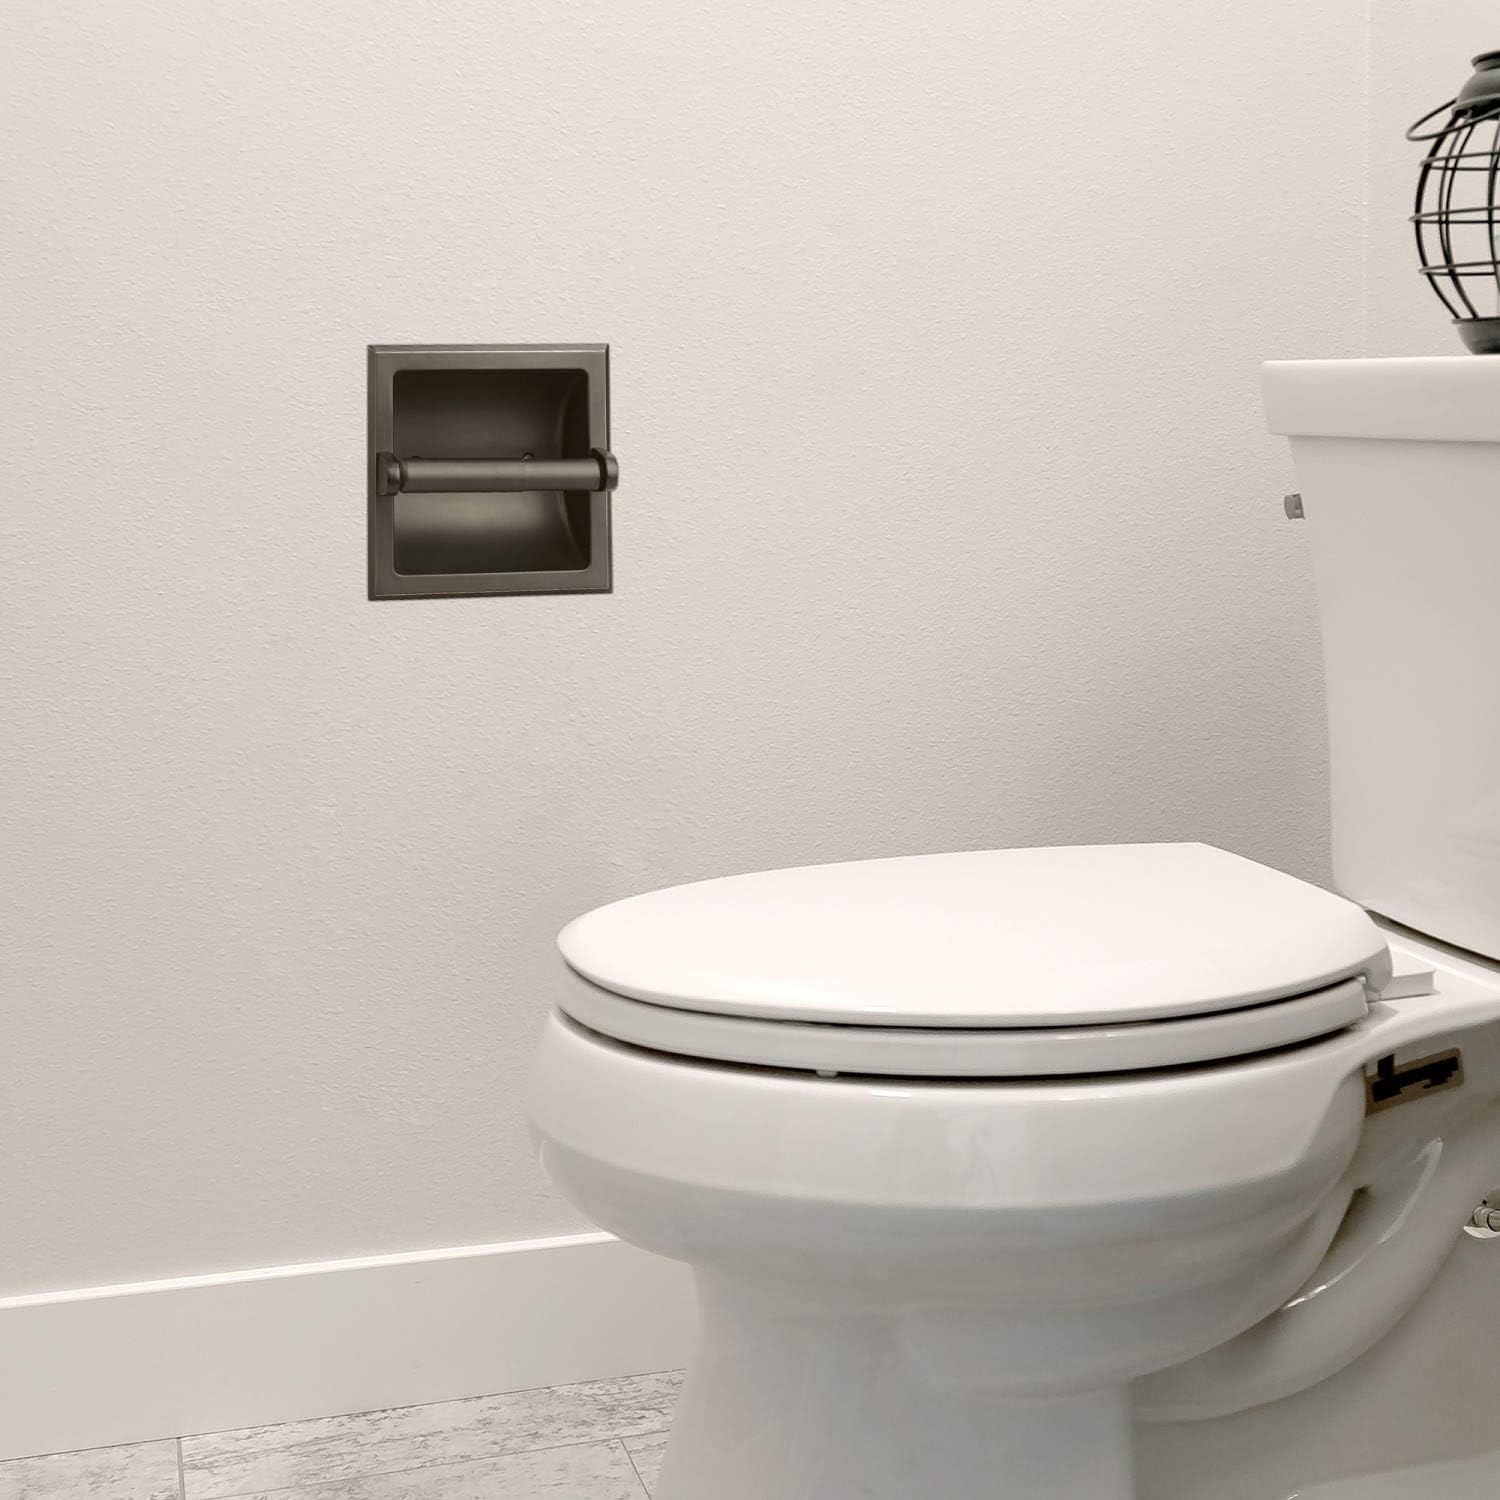 How To Patch Wall From A Recessed Toilet Paper Holder